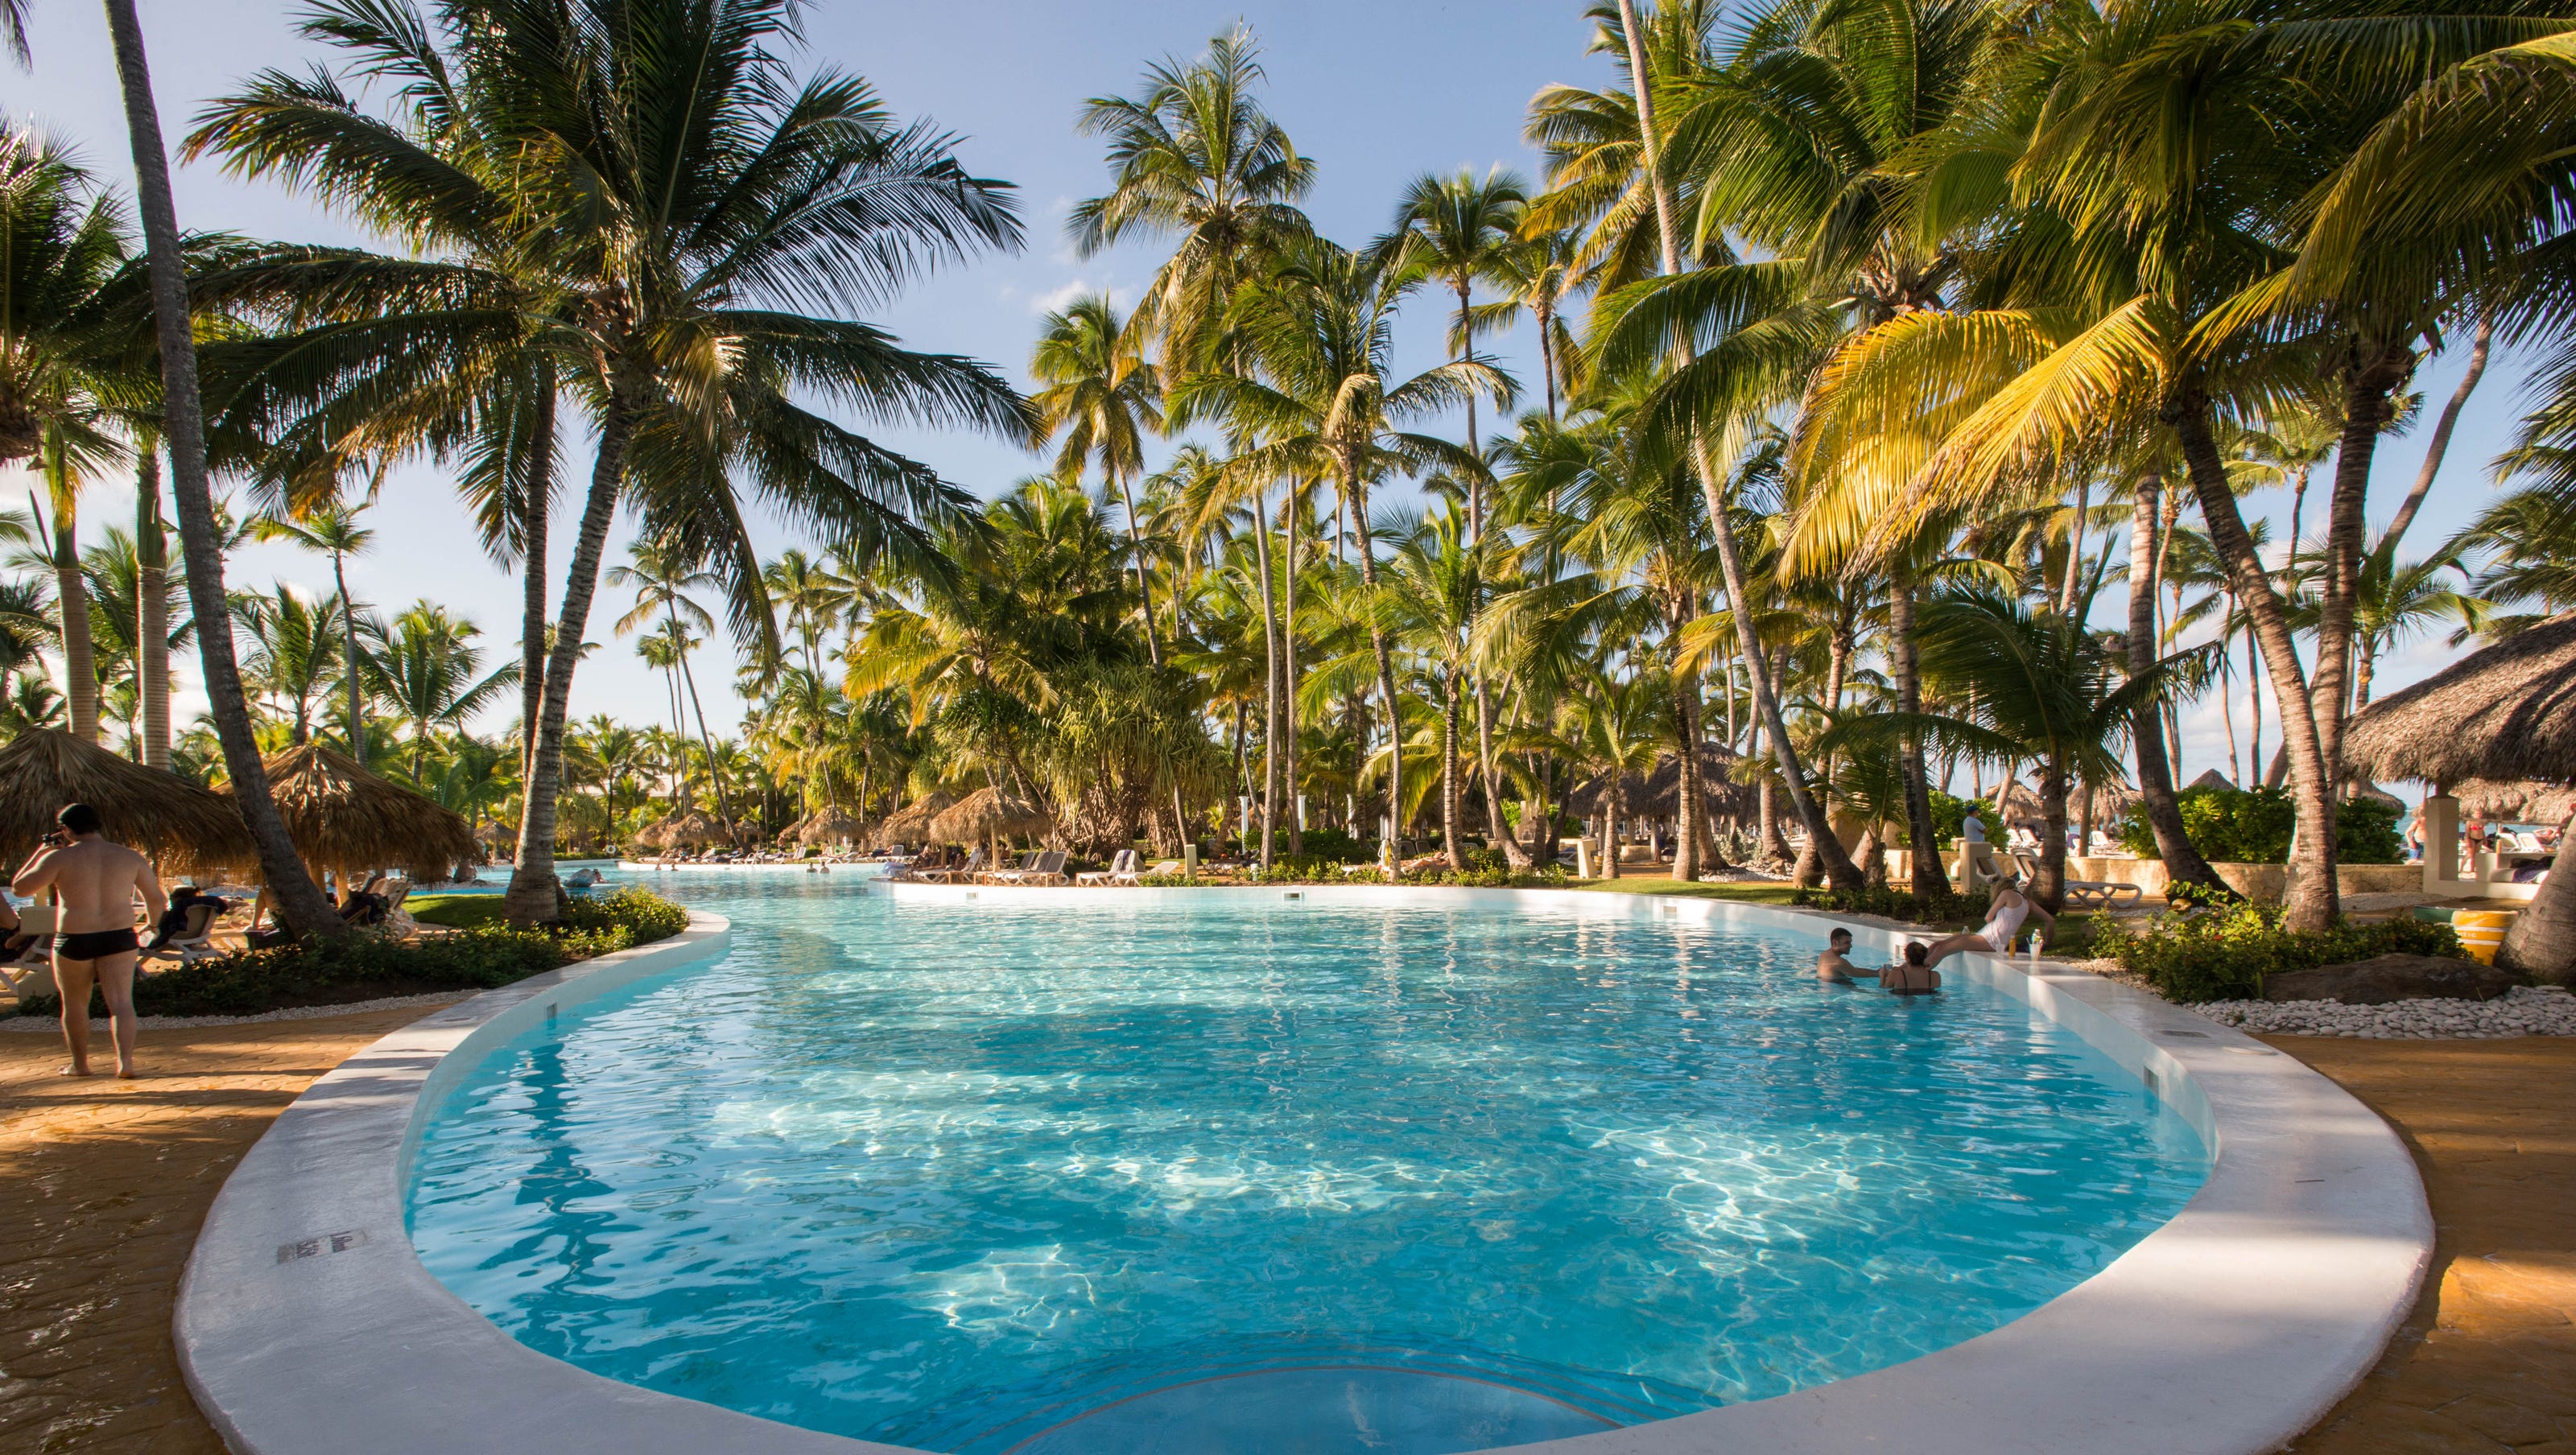 Caribbean resorts with adults-only pools